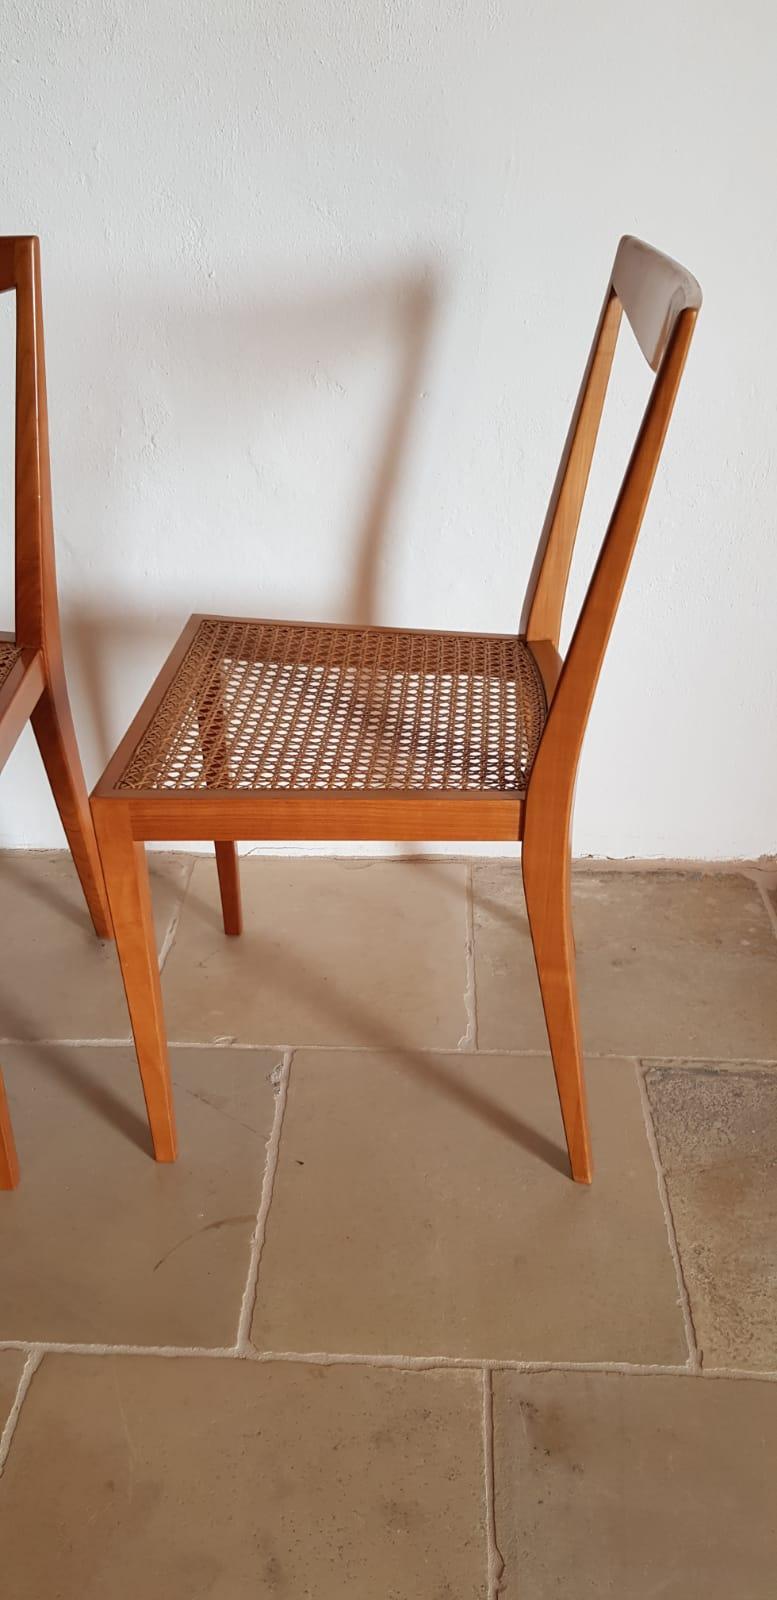 Elegant dining chairs, designed by Hans Wölfl in Vienna in the 1950s the chairs are made from solid hardwood, featuring tapered legs. Good vintage condition.
Set of four delivery time 3-4 weeks, the caning is partially damaged and will be replaced